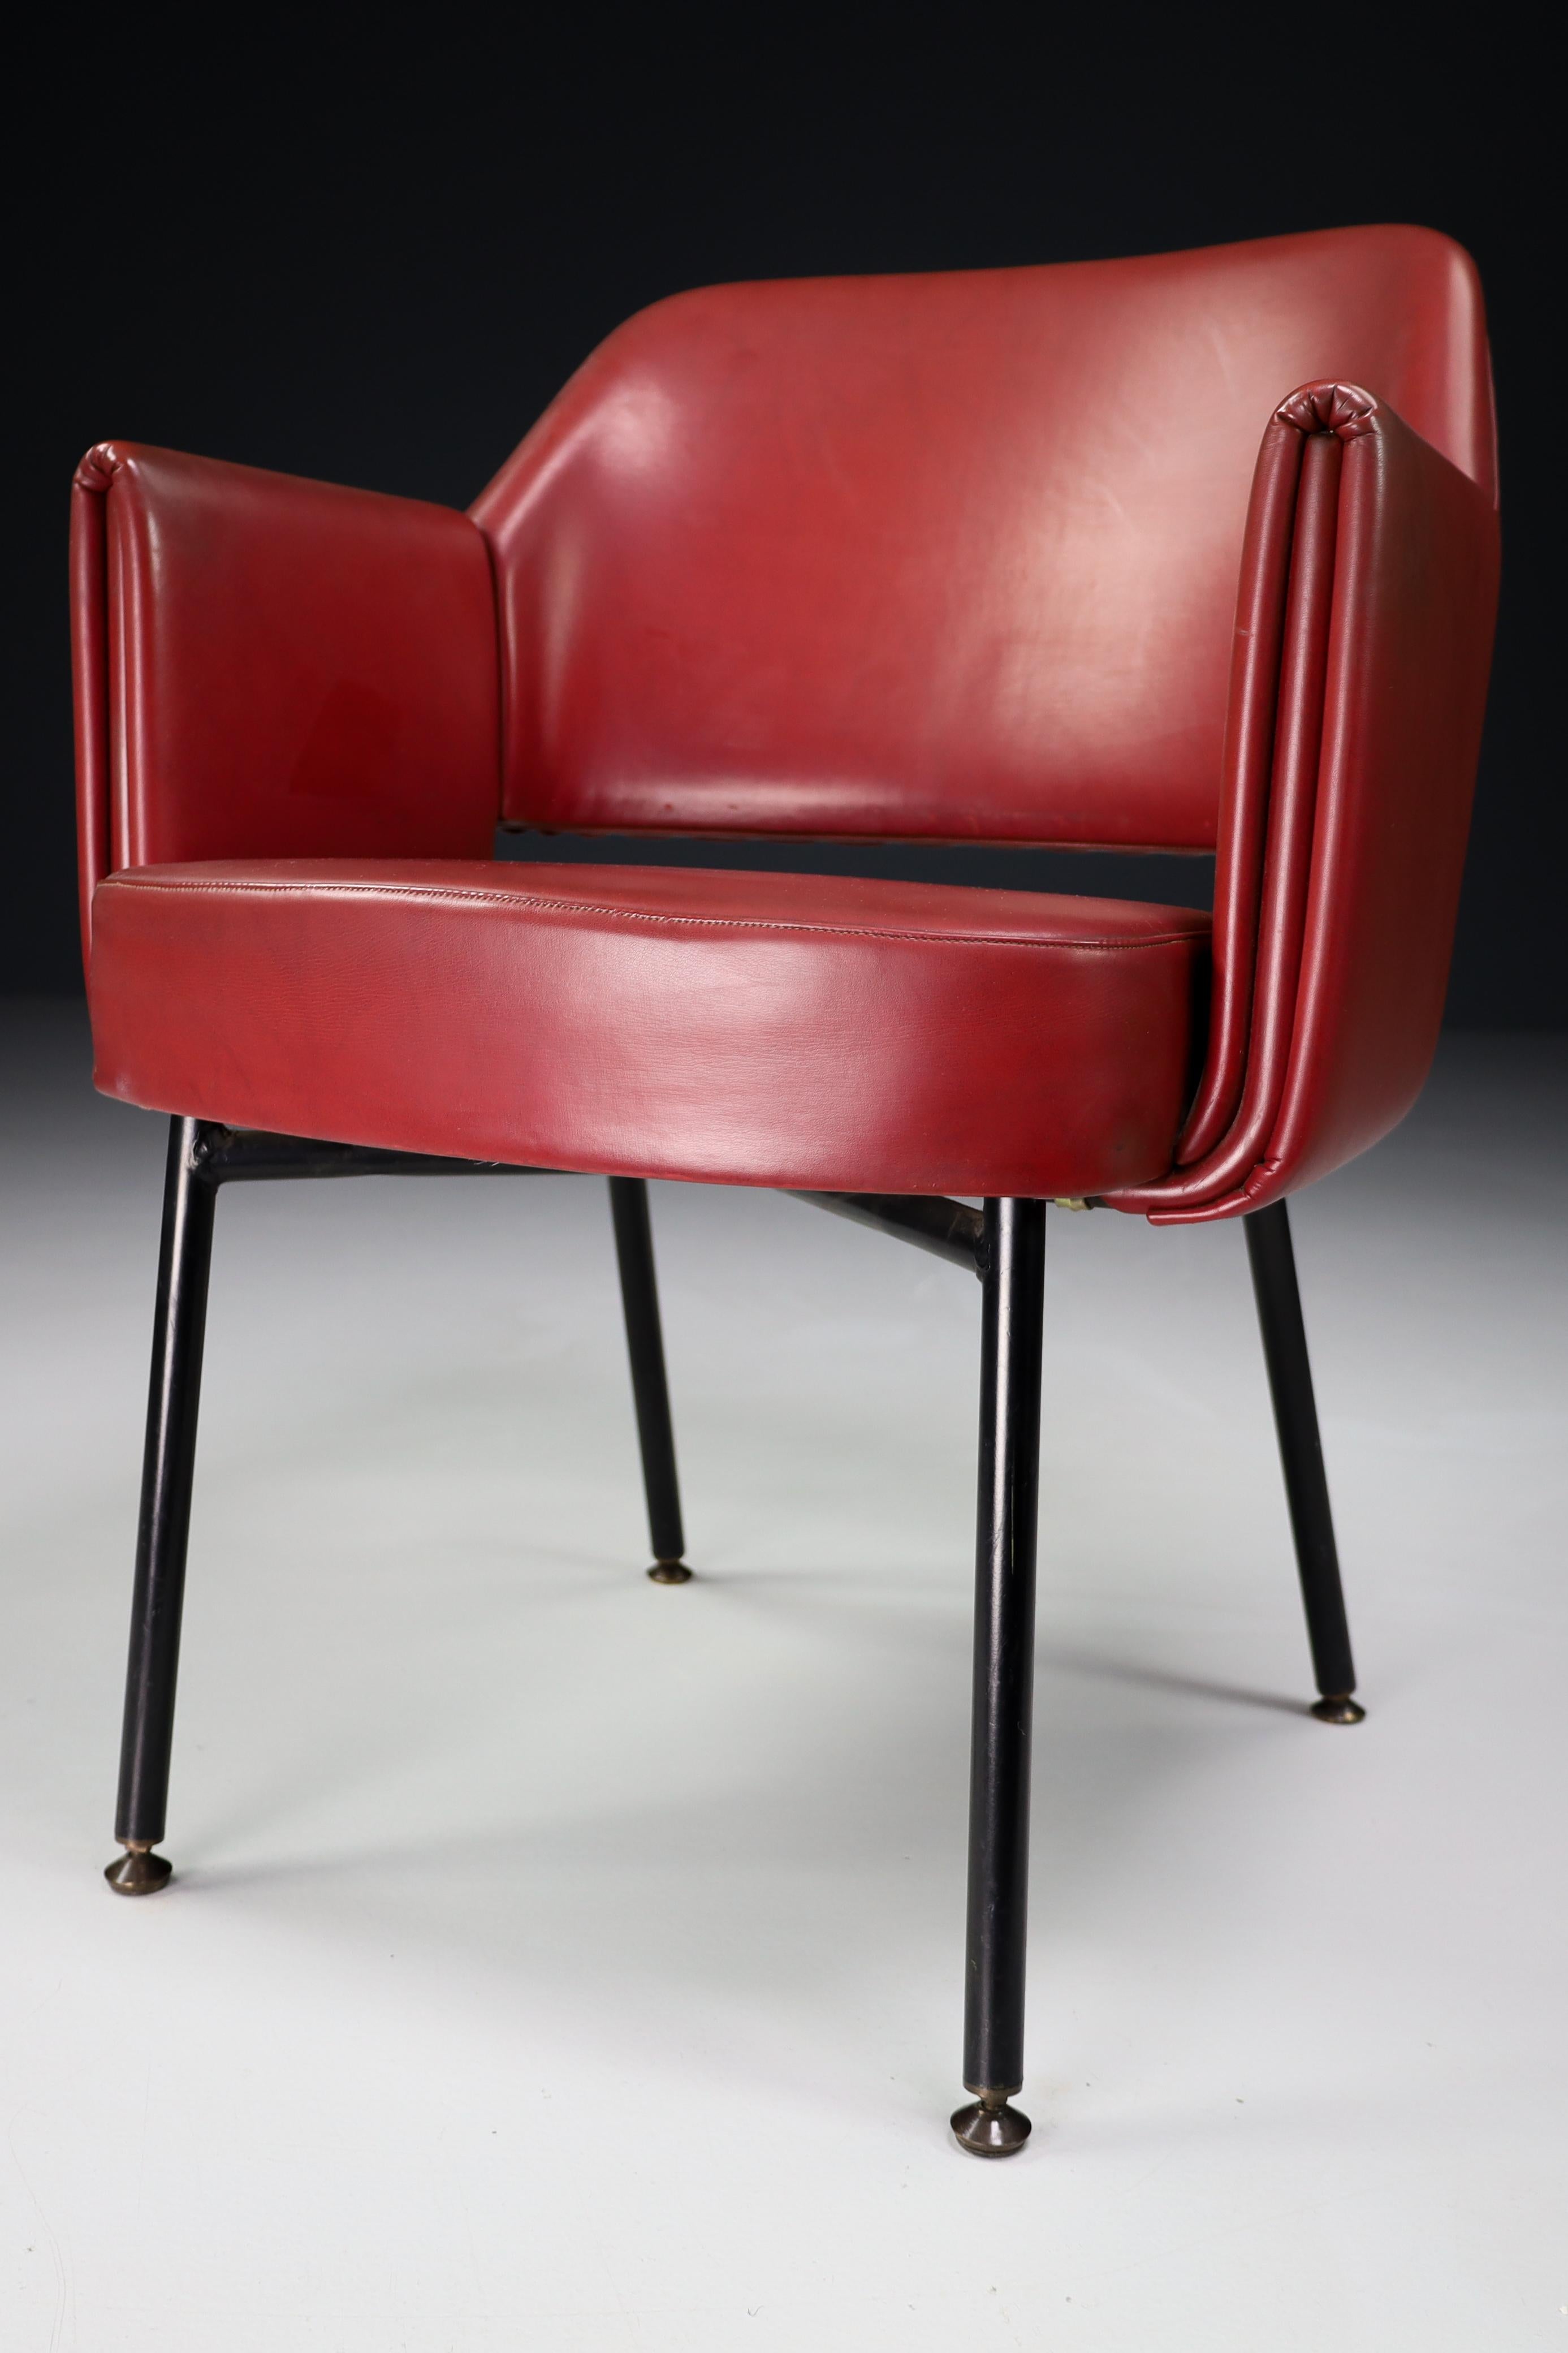 Midcentury Chair Model "Deauville", Designed by Marc and Pierre Simon, 1962 For Sale